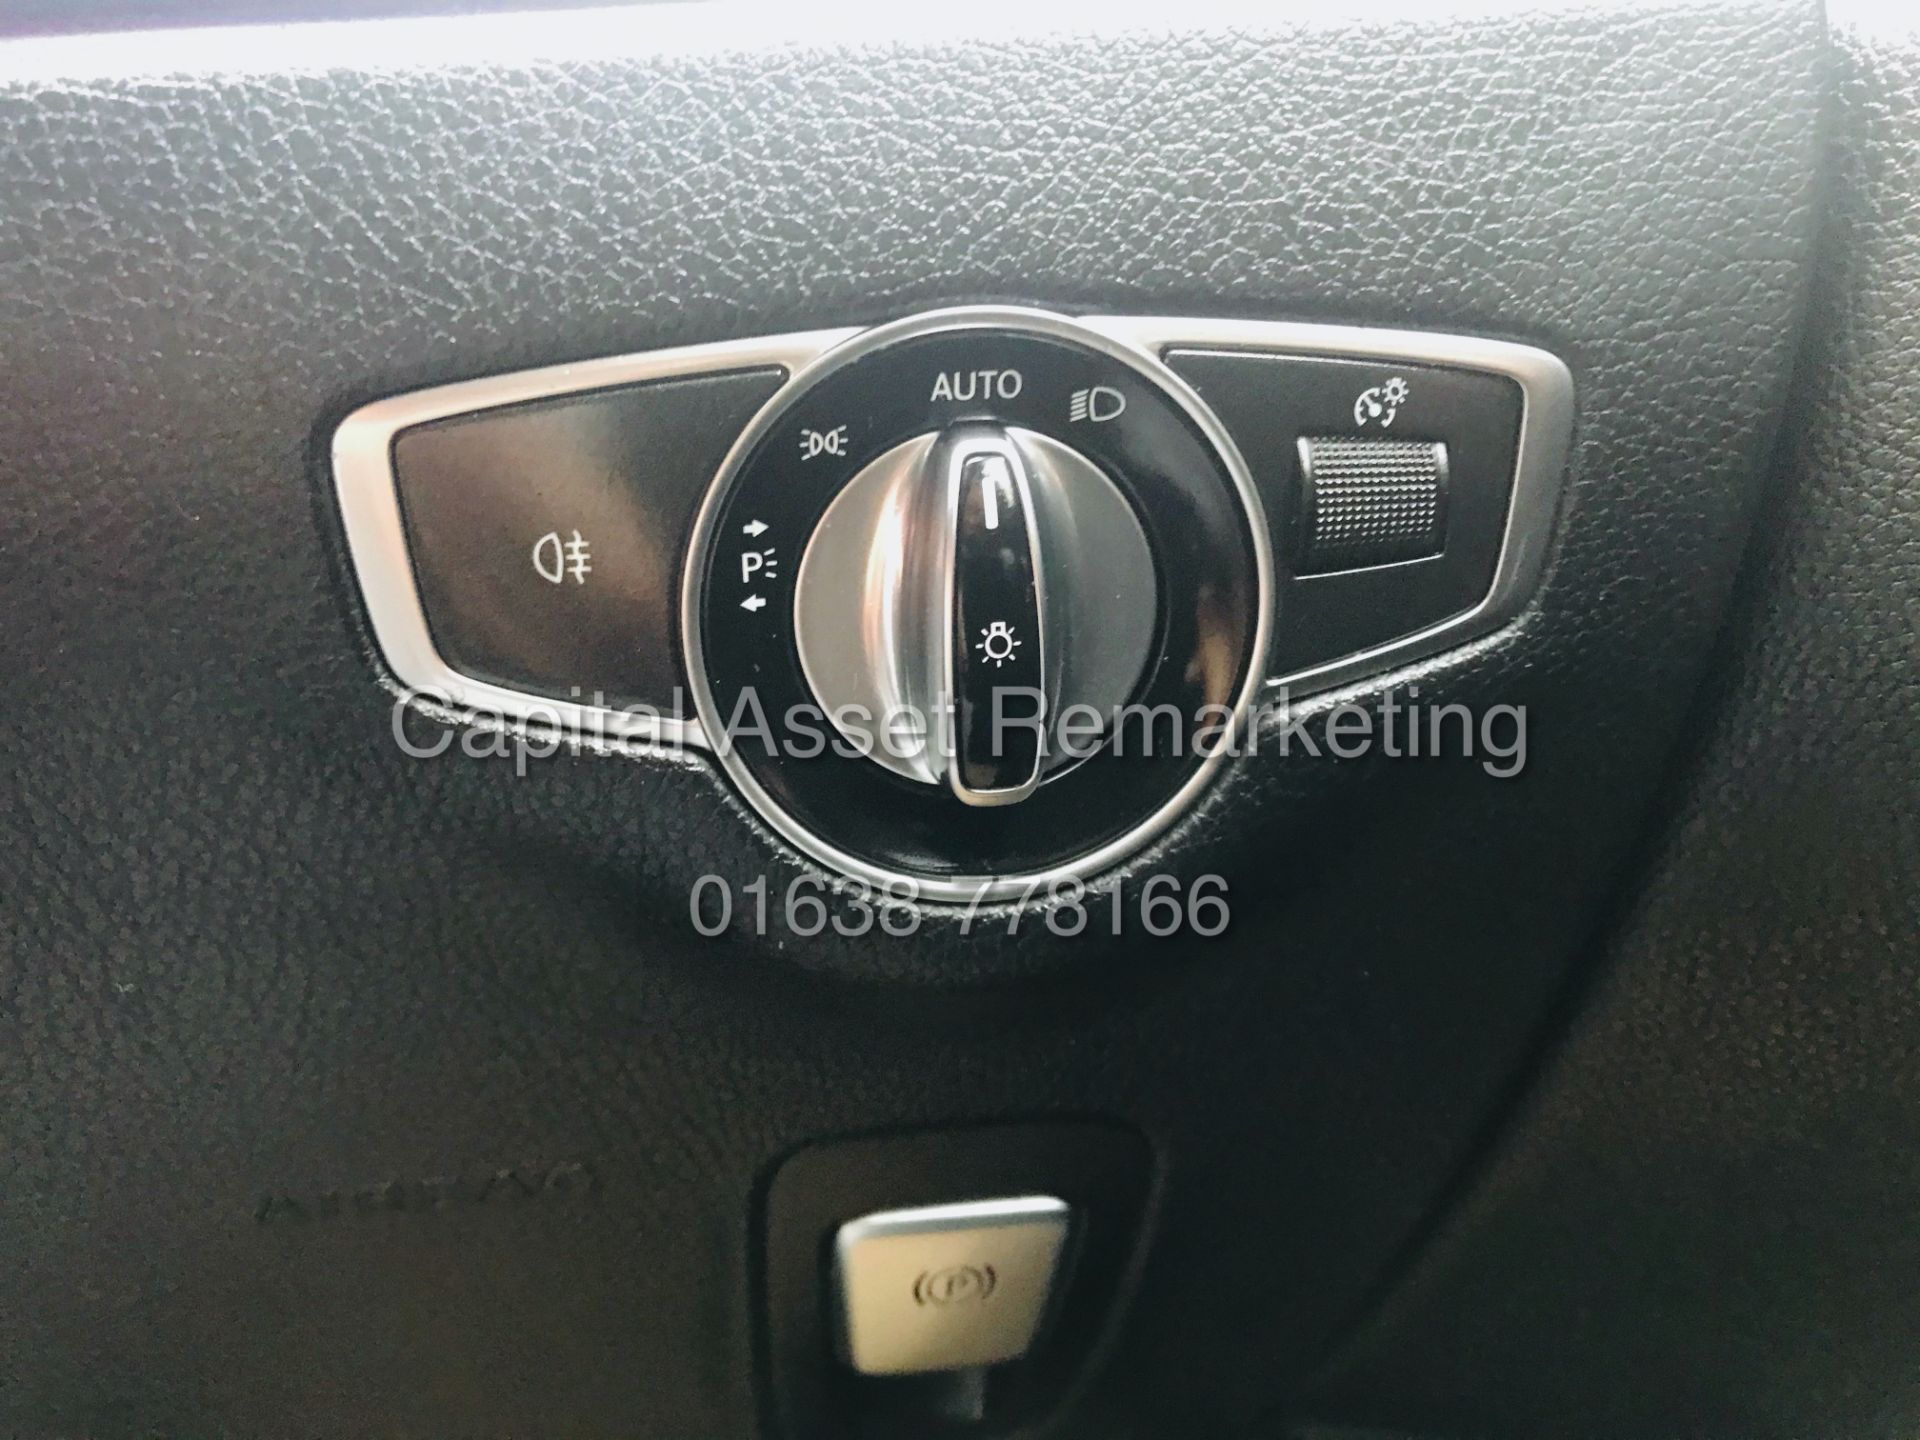 MERCEDES E220d "SE" SPECIAL EQUIPMENT ESTATE "AUTO" (2019 MODEL) 1 KEEPER - LEATHER - SAT NAV - WOW! - Image 19 of 35